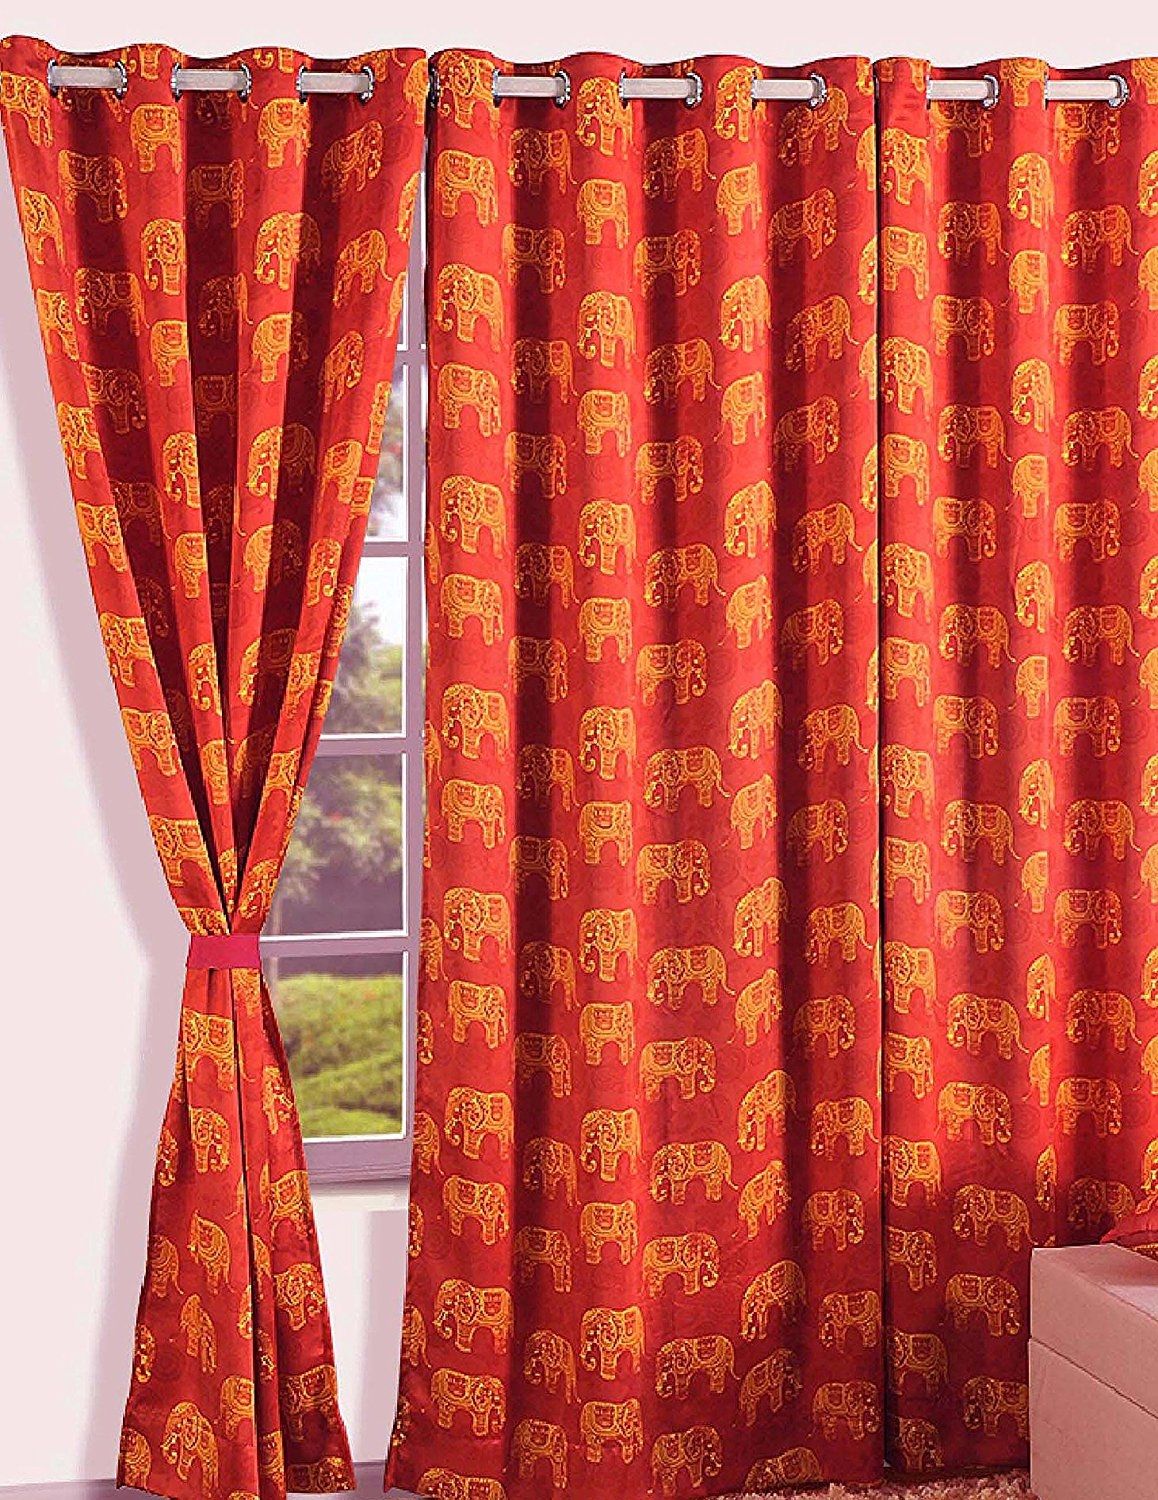 Winsome Moroccan Style Curtains 63 Moroccan Style Eyelet Curtains In Morrocan Style Curtains 1 